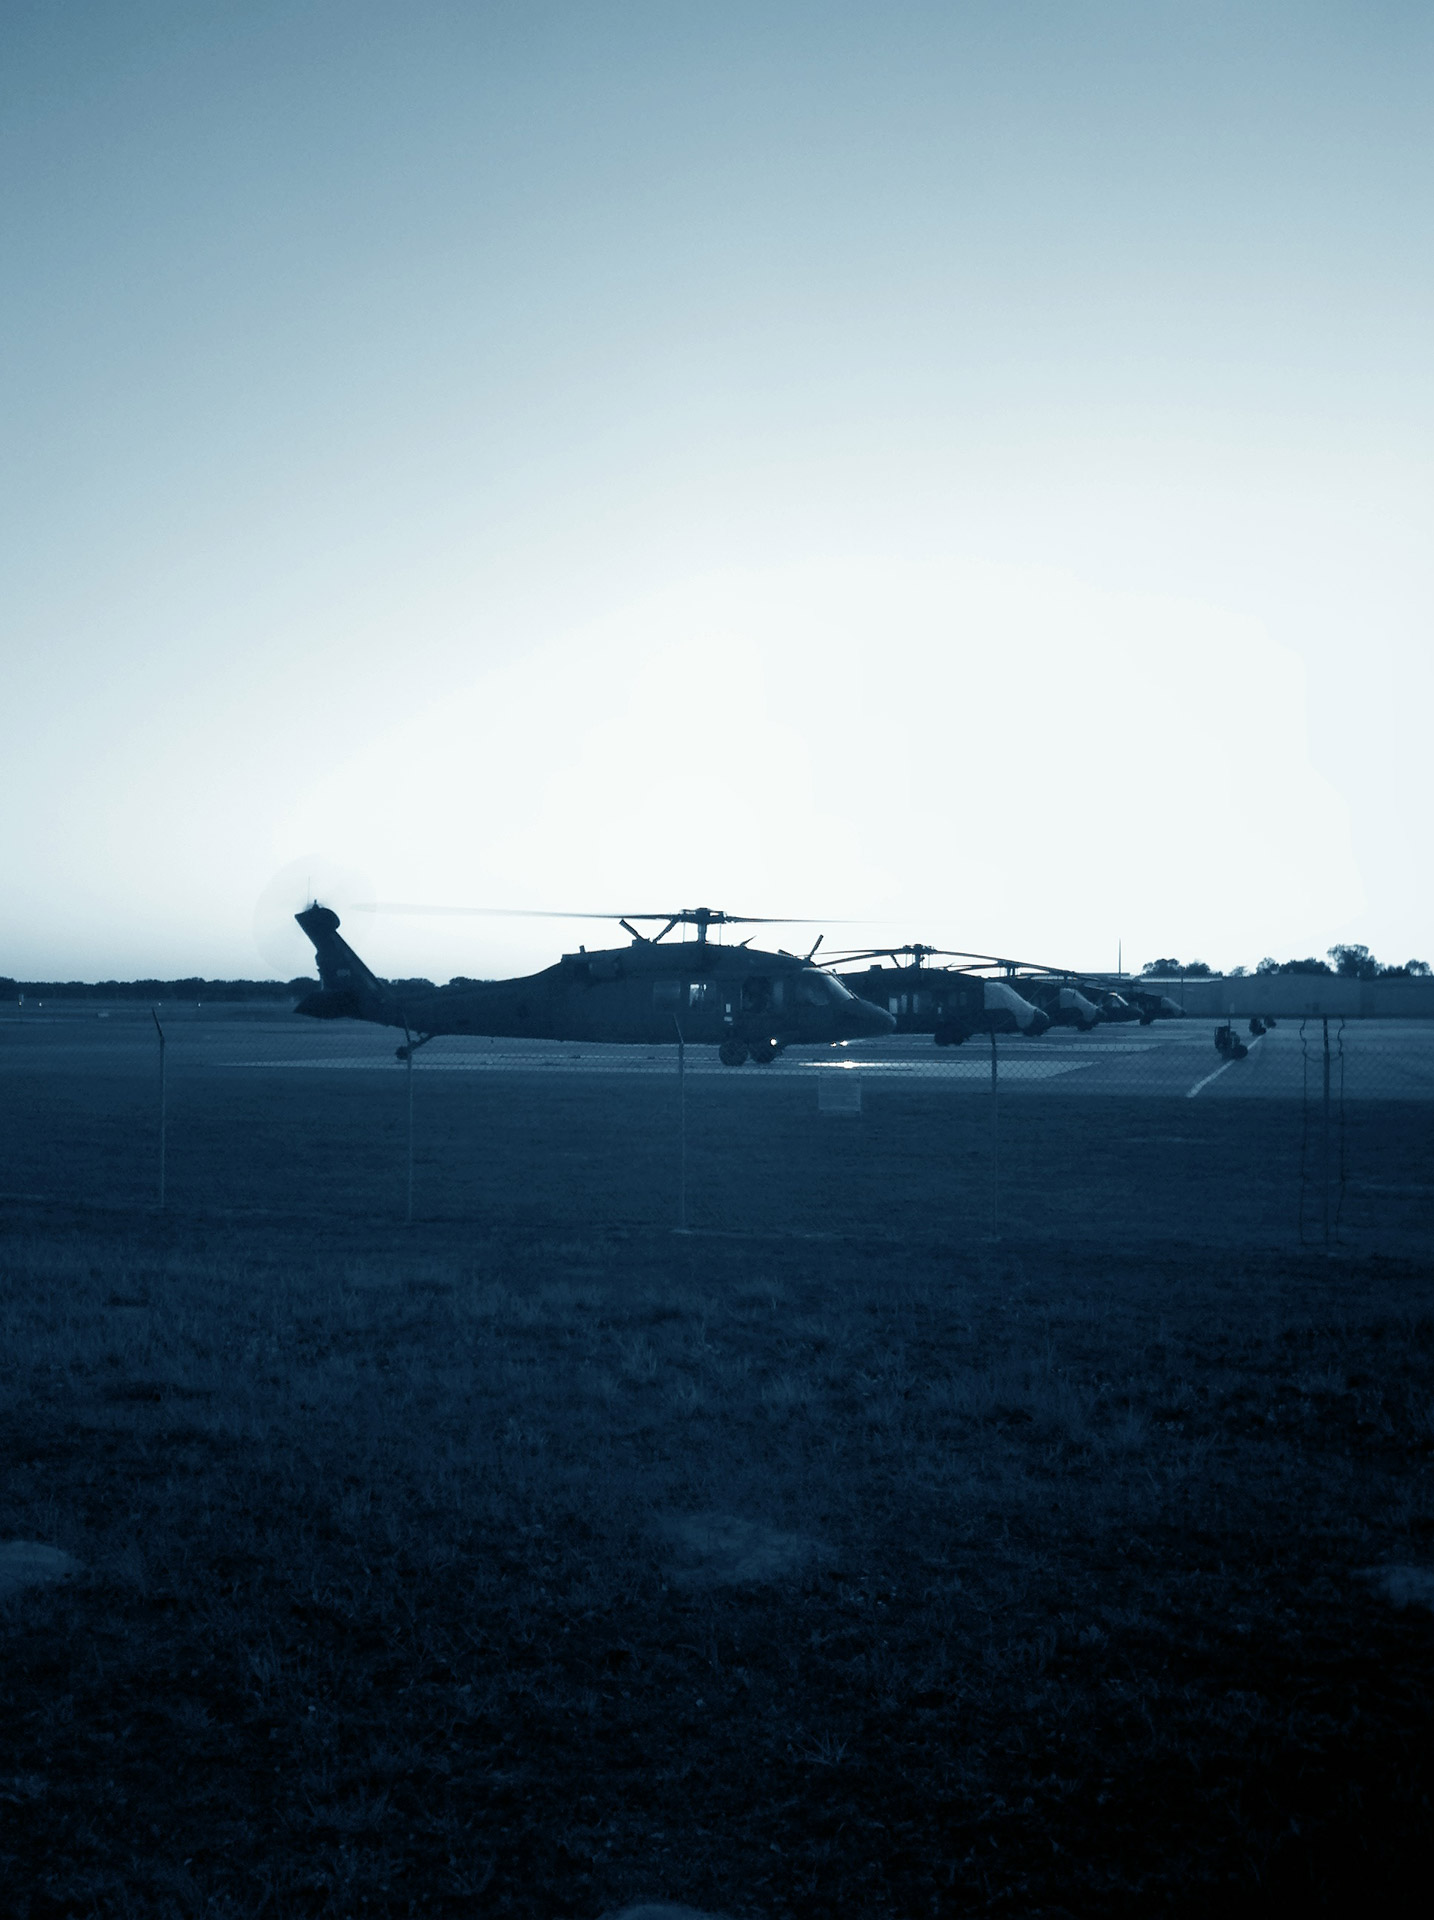 This picture is of Black Hawk Helicopters that are waiting to be refueled during dusk.